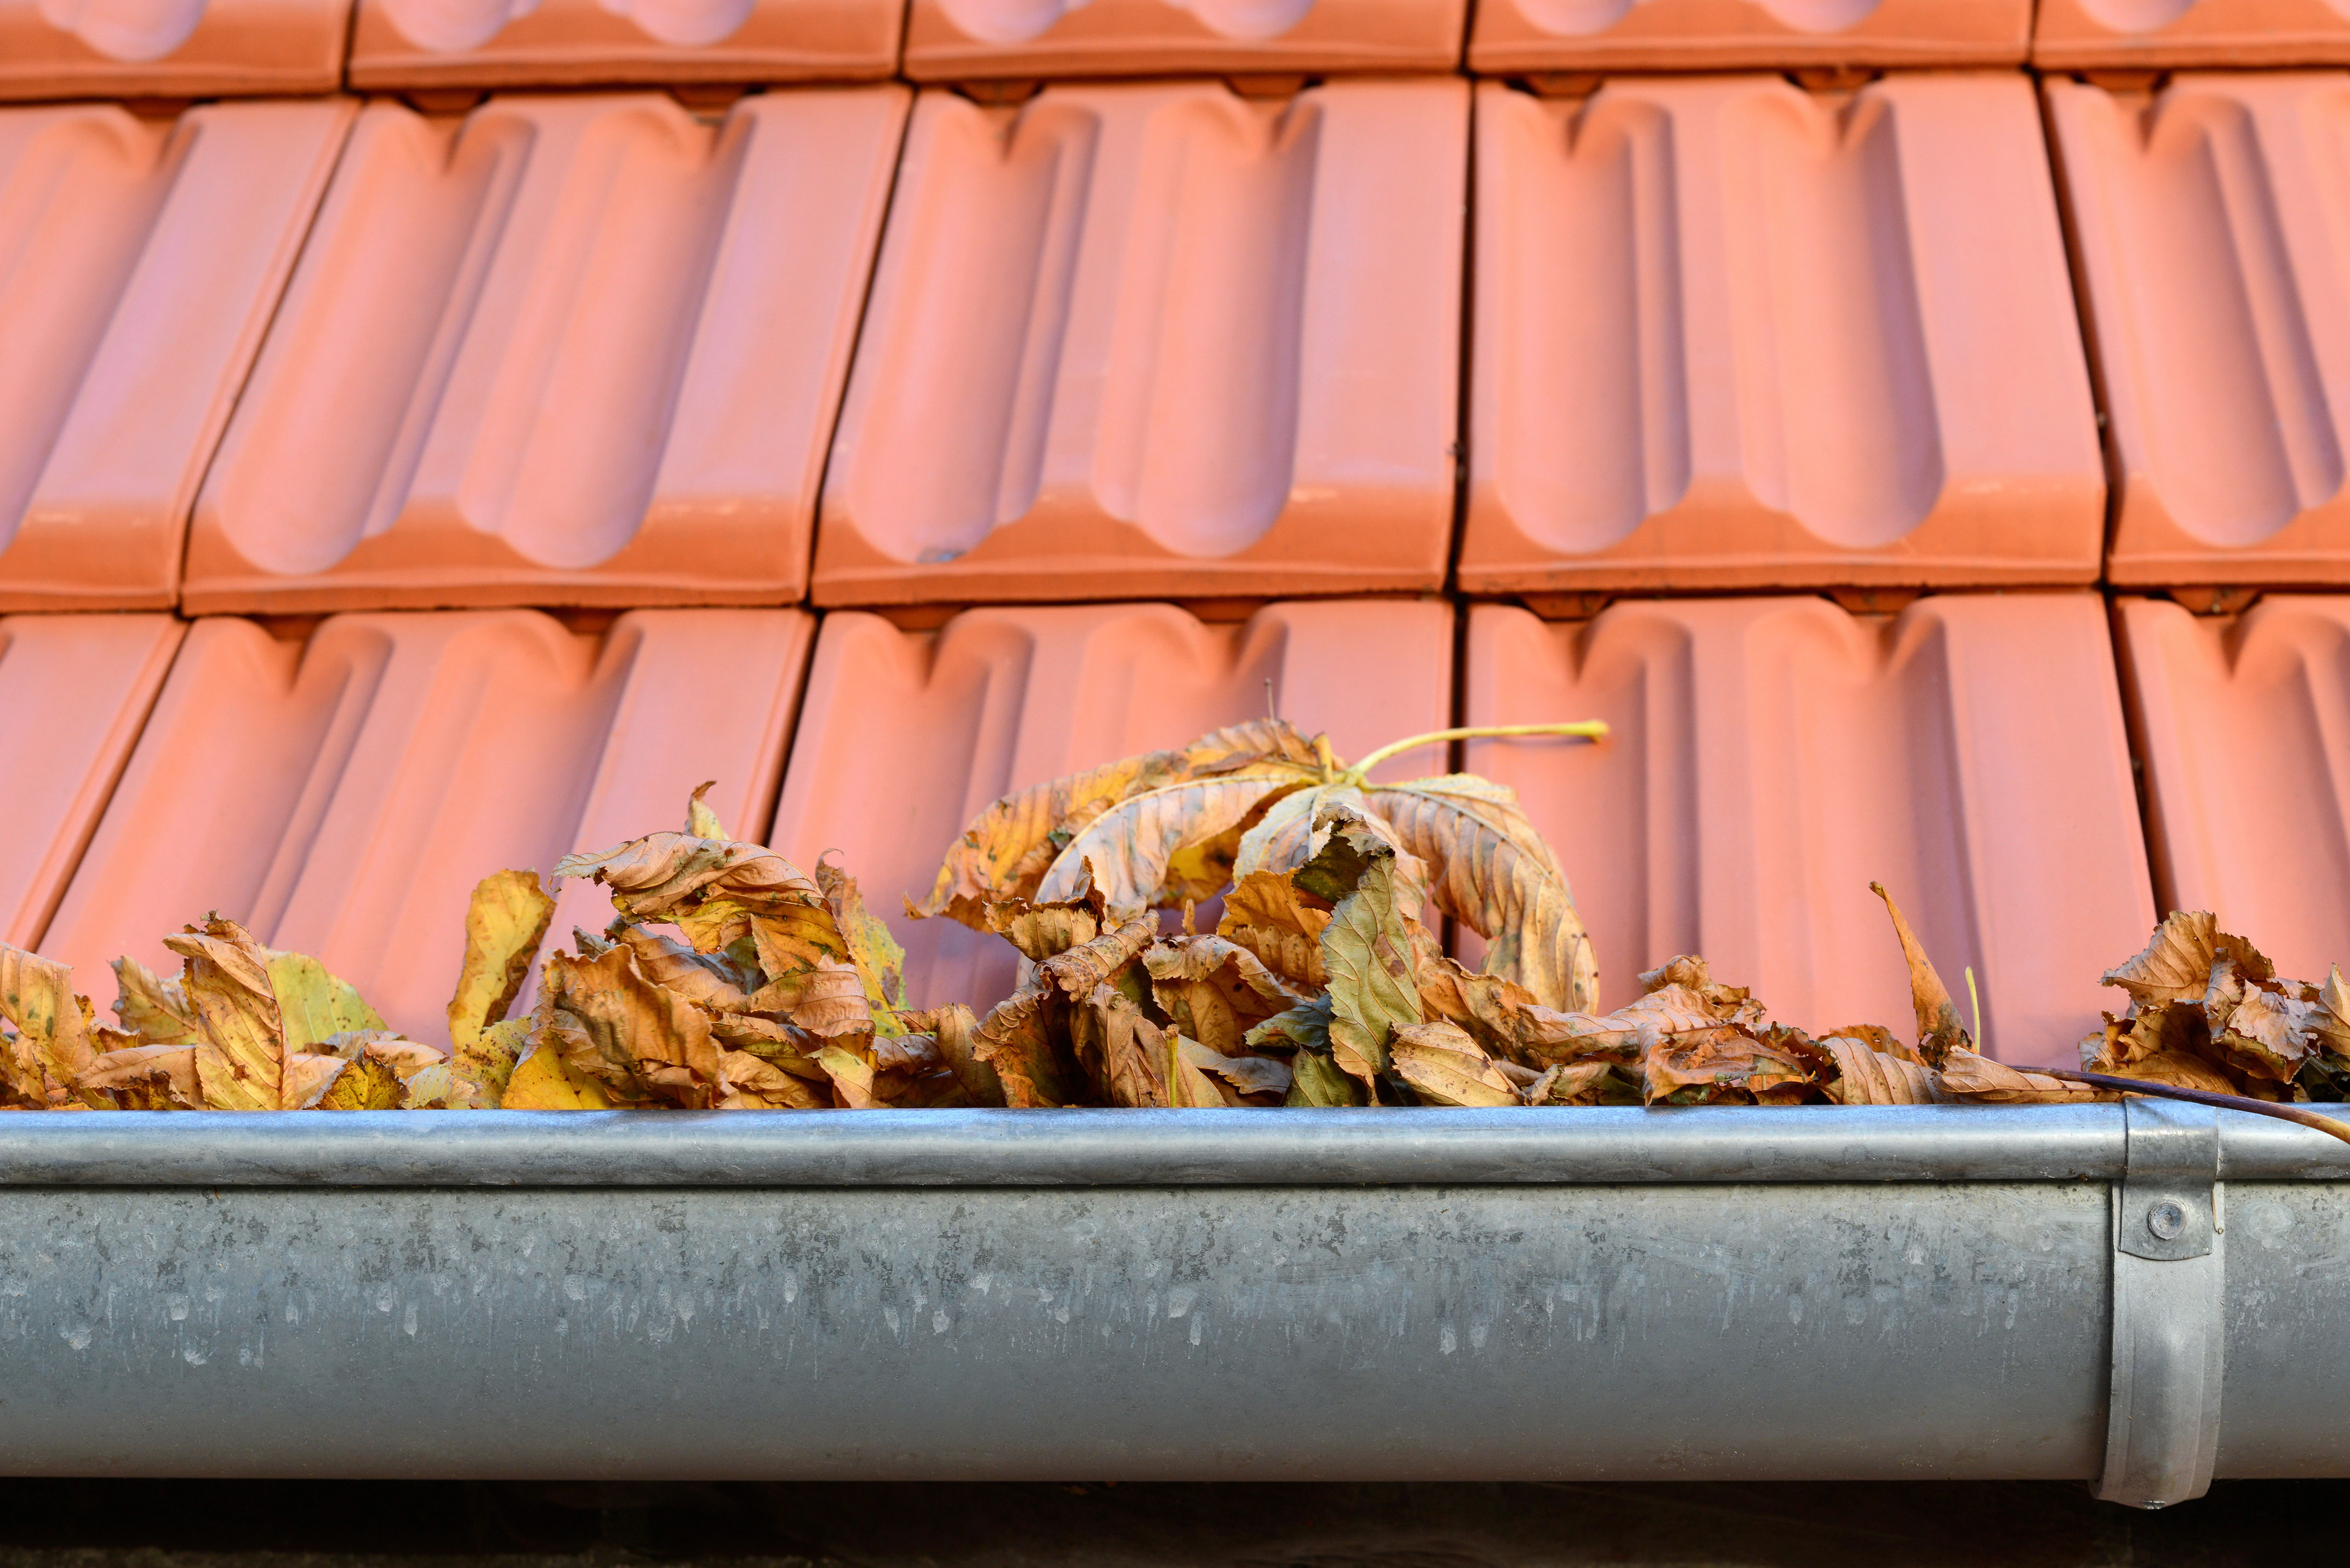 gutter cleaning, pest control, leaf removal,